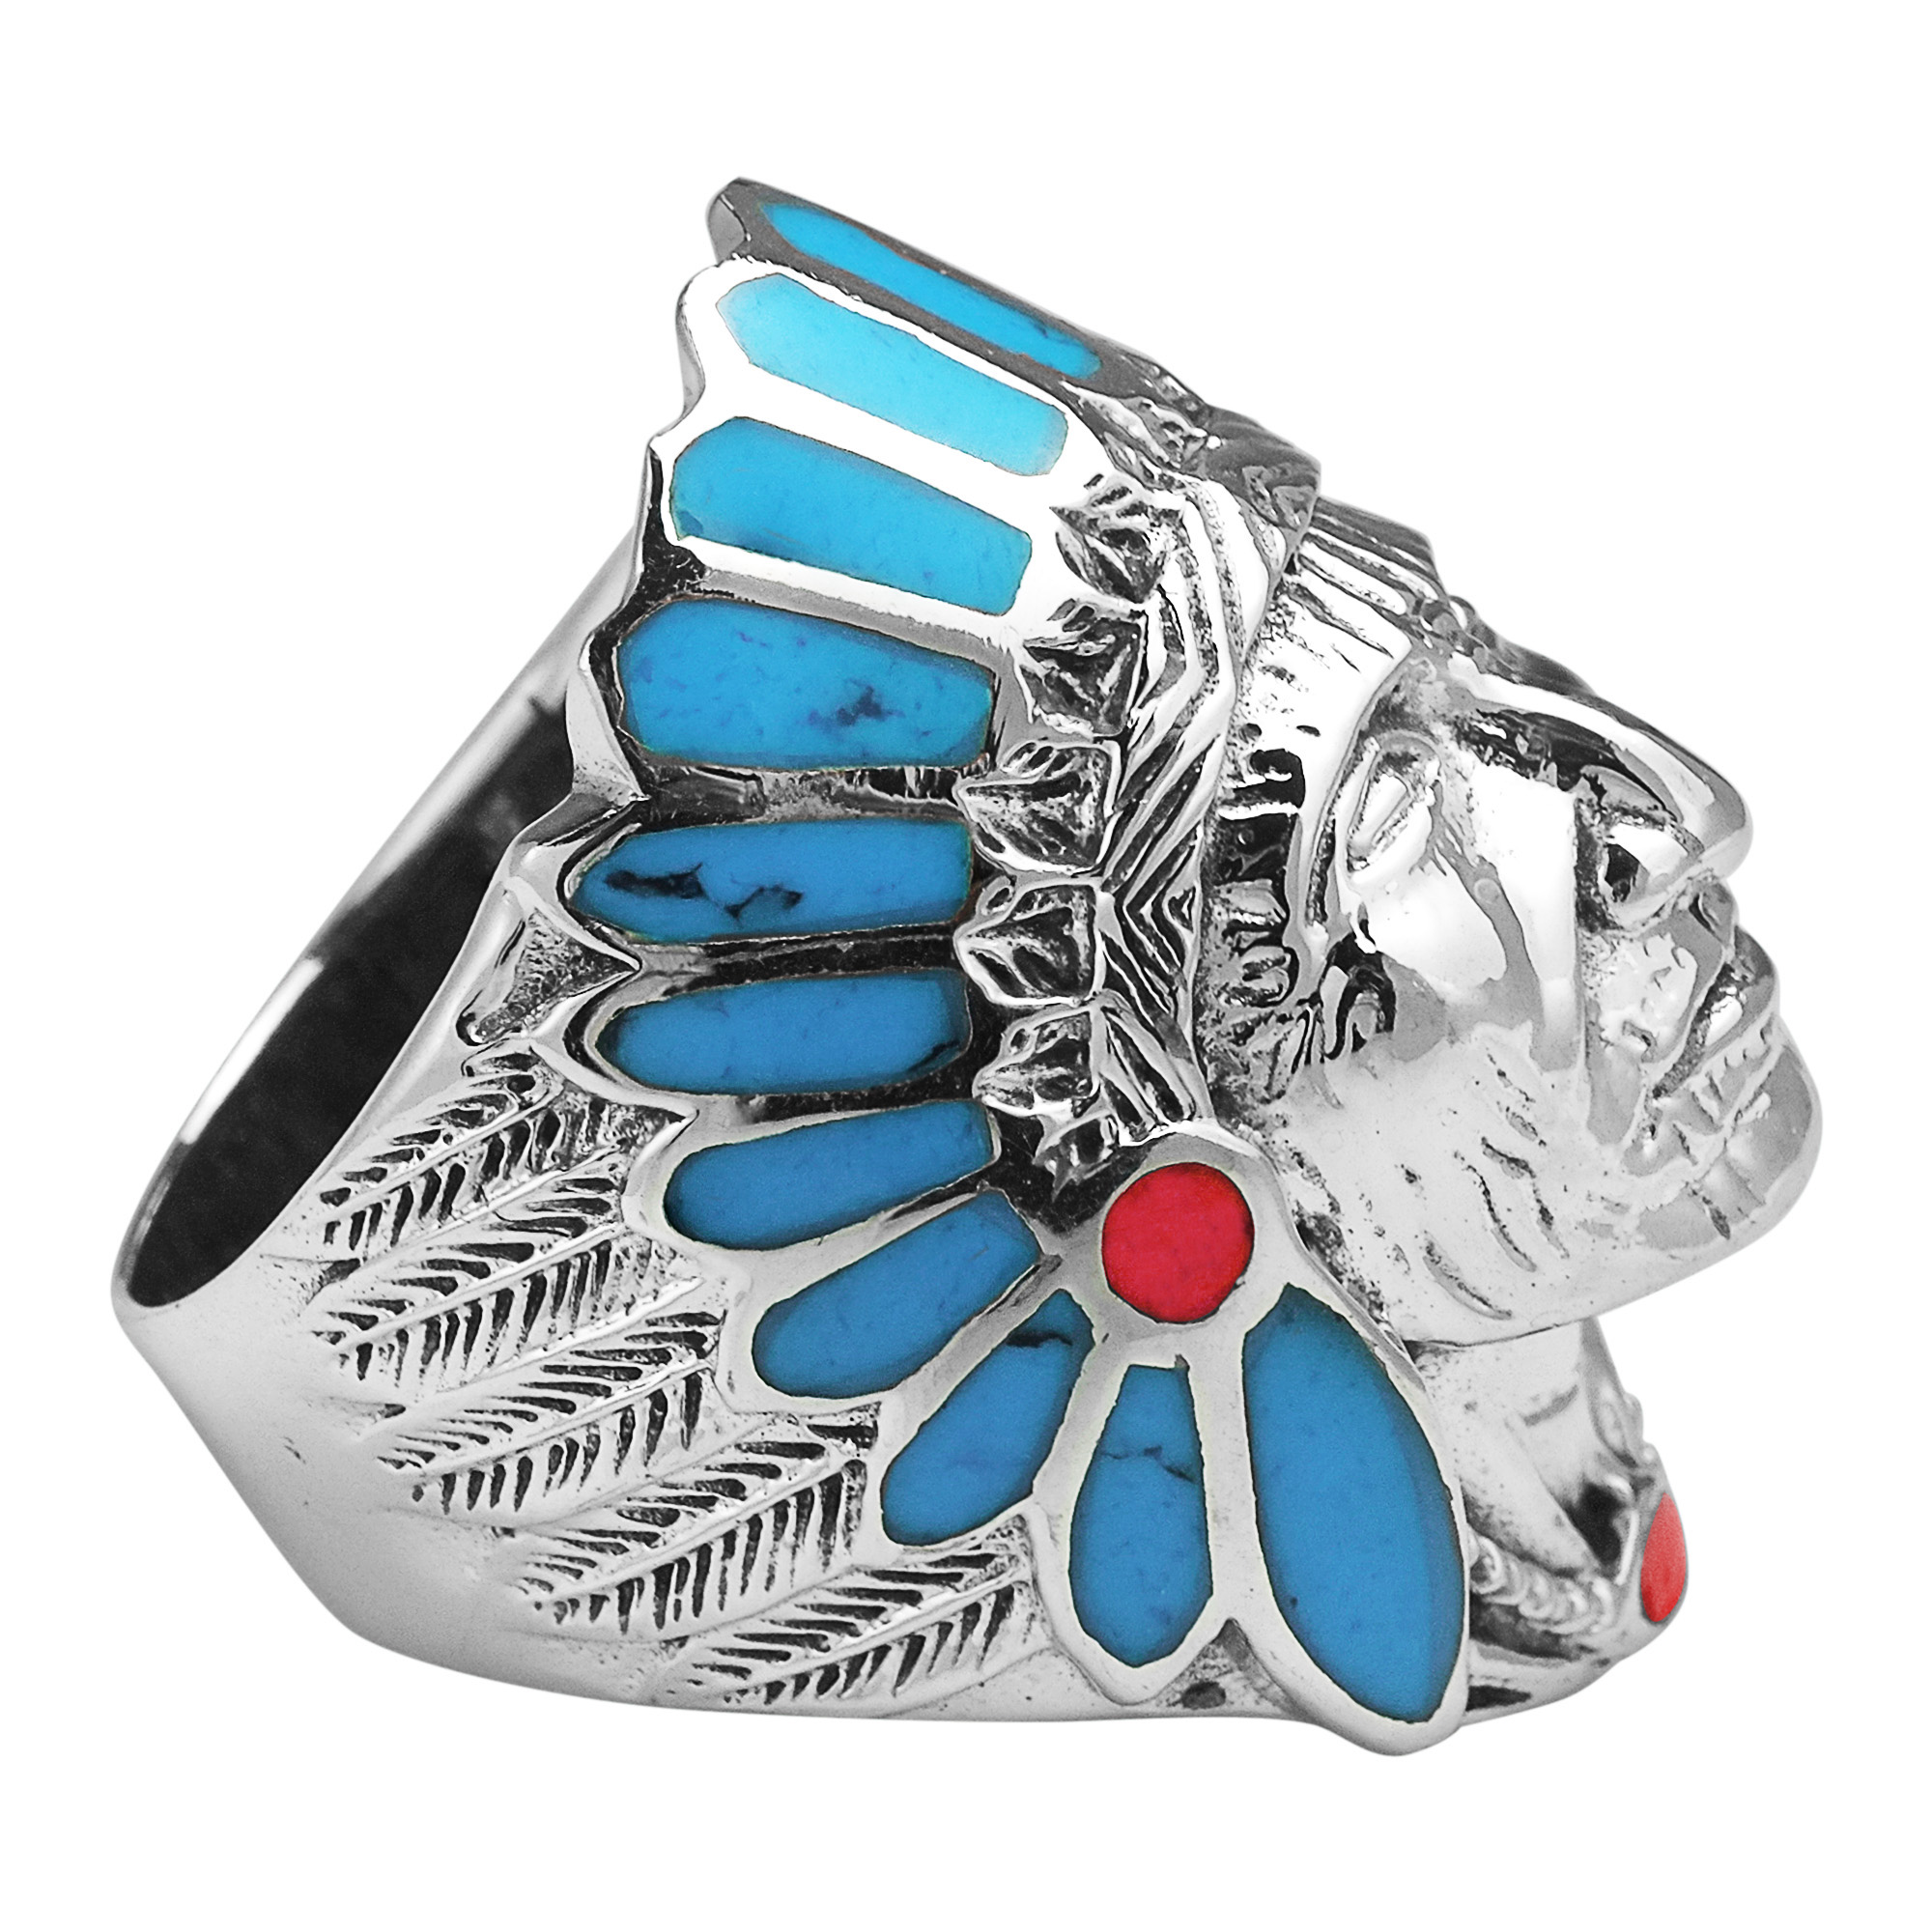 Silver Indian ring Silver Native American  Ring with Indian roach headdress Biker jewelry